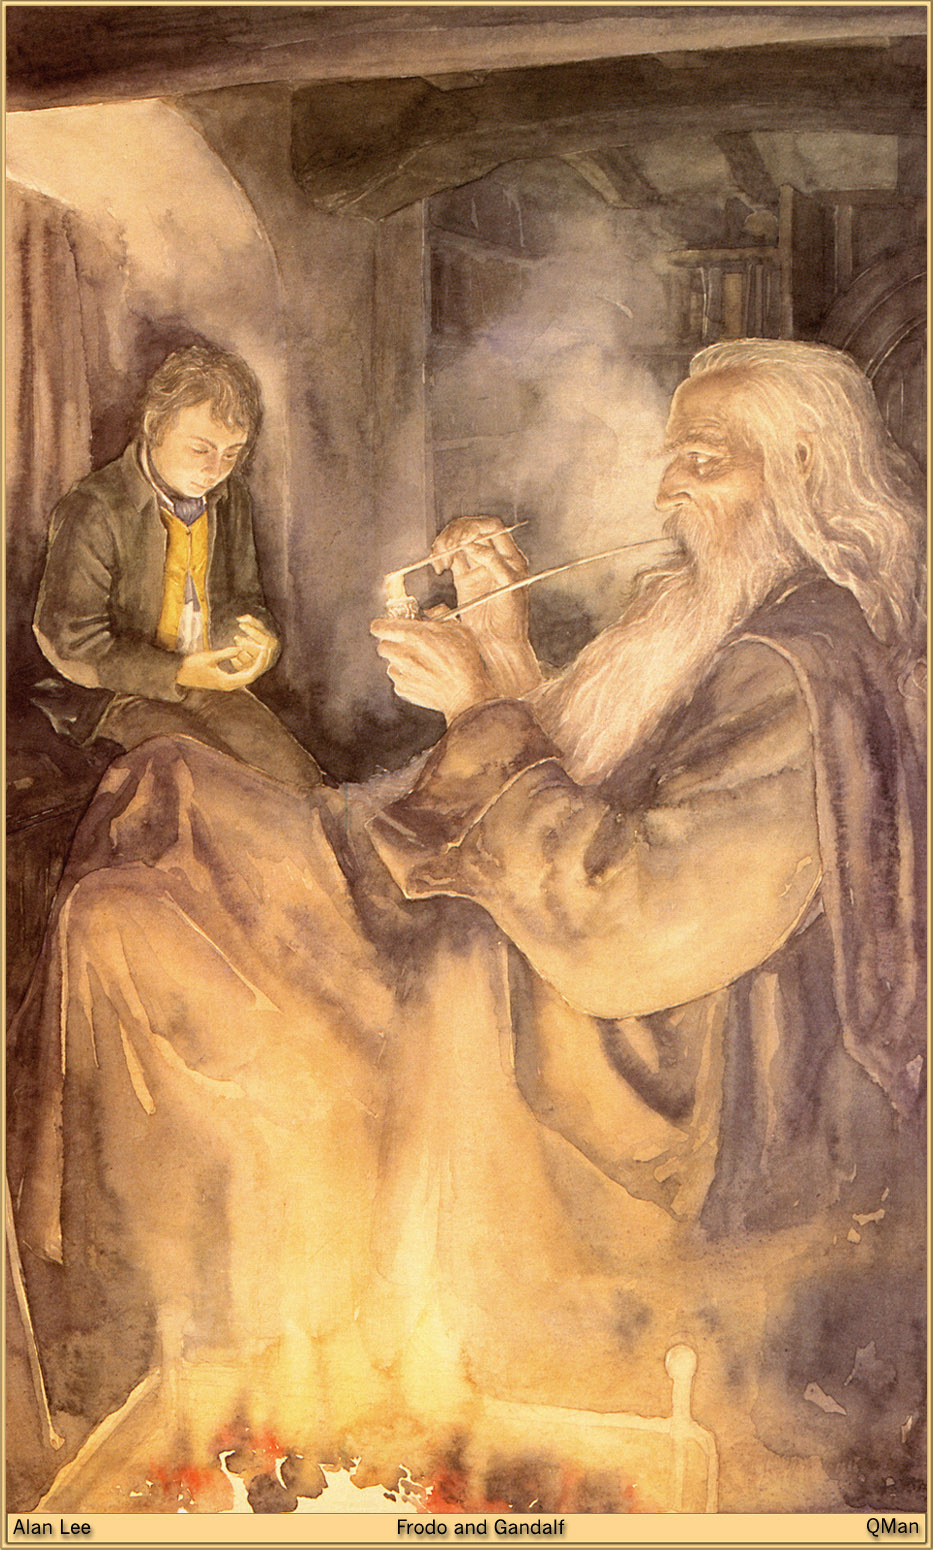 Fellowship Of The Ring Illustrated: J.R.R. Tolkien, Alan Lee